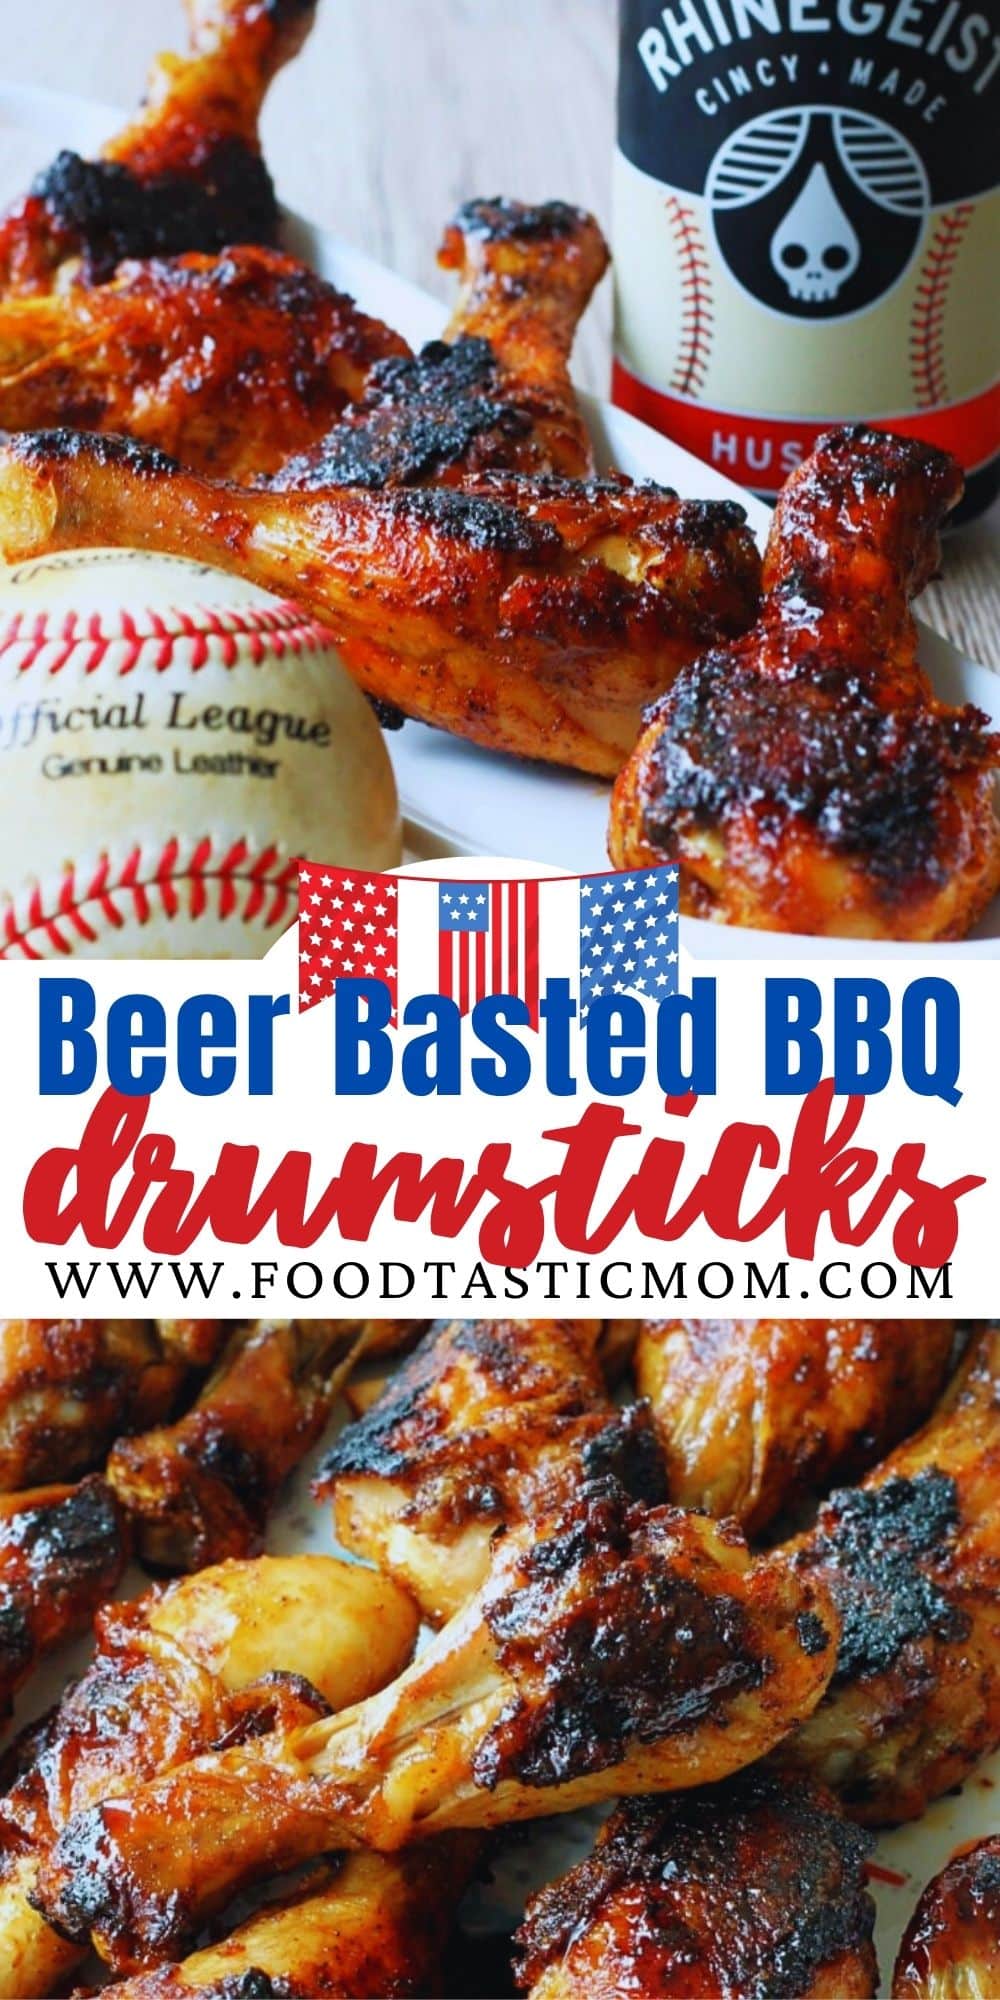 Chicken Drumsticks marinated in beer, oven baked and basted with a homemade apricot BBQ sauce. via @foodtasticmom